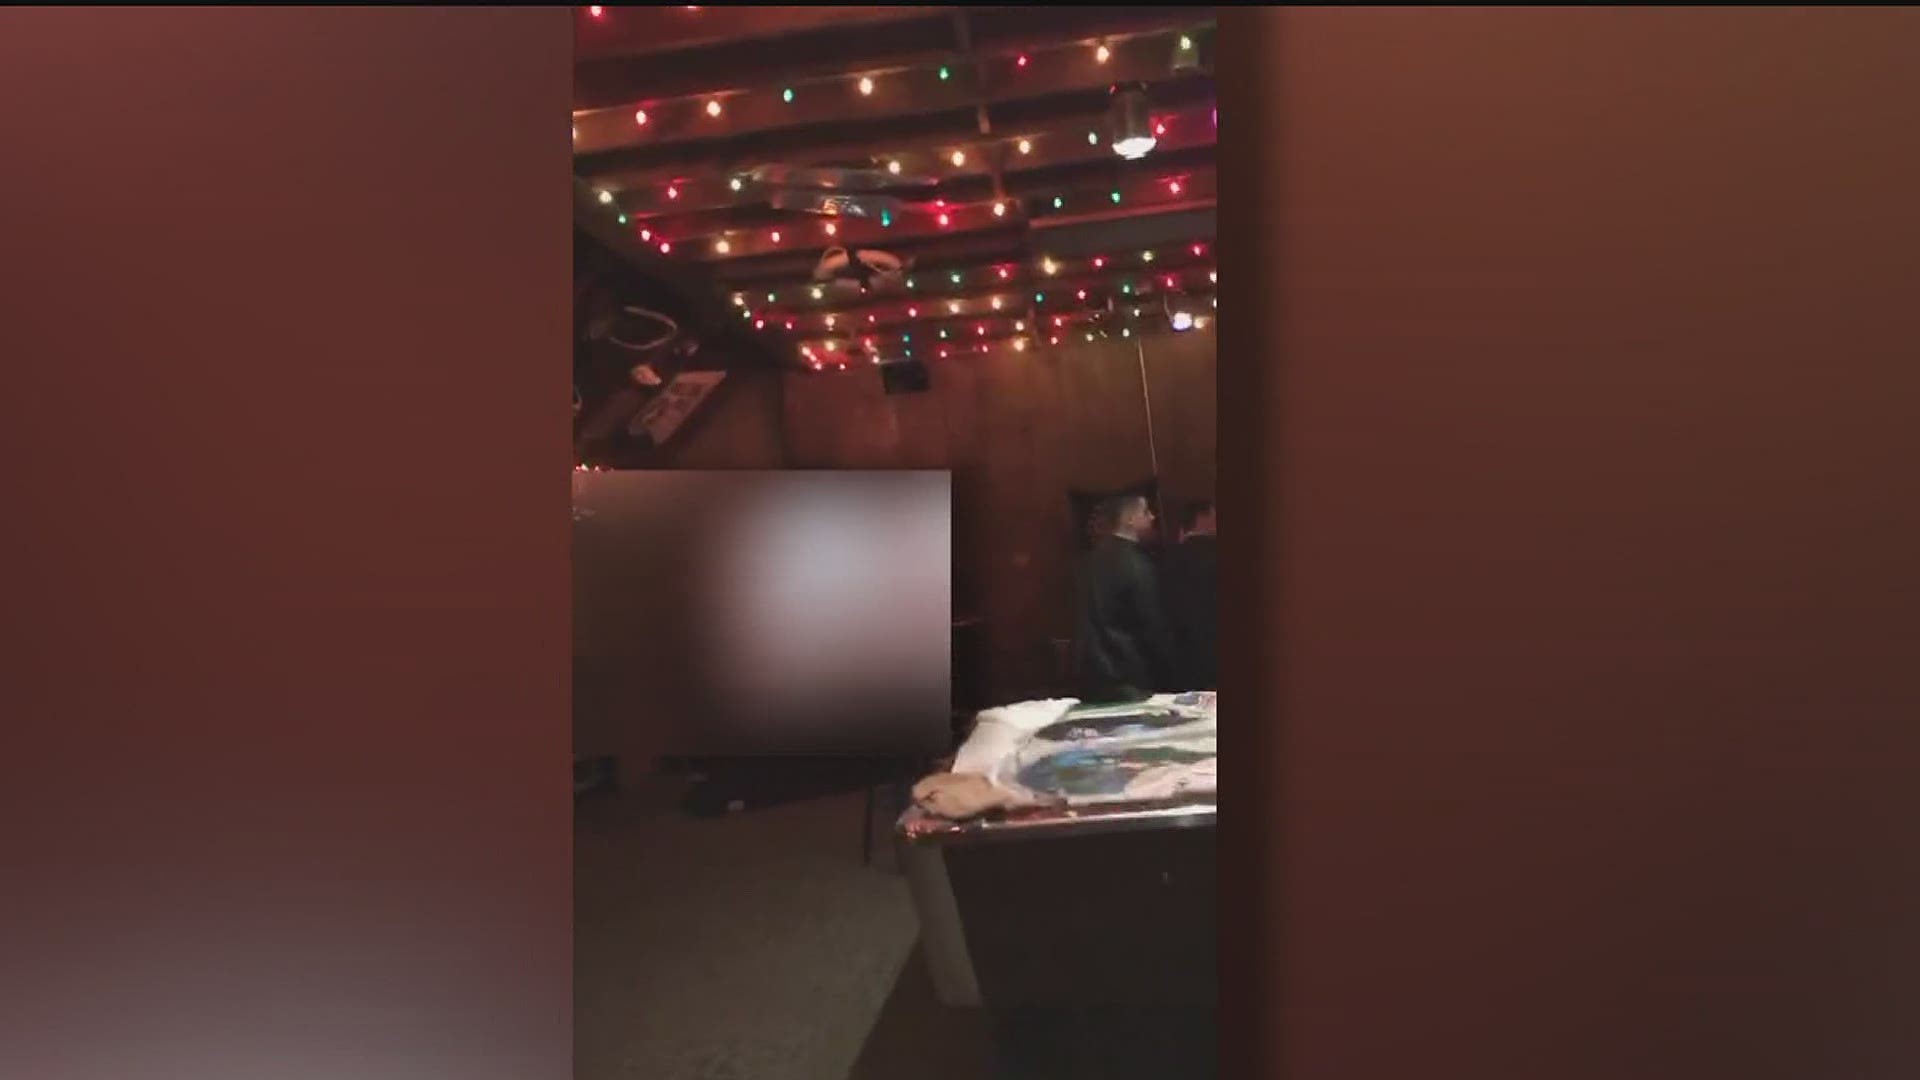 Augustana college freshmen were shown an explicit video at a Phi Omega Phi informal rush event. Some students are now calling for the fraternity to be banned.